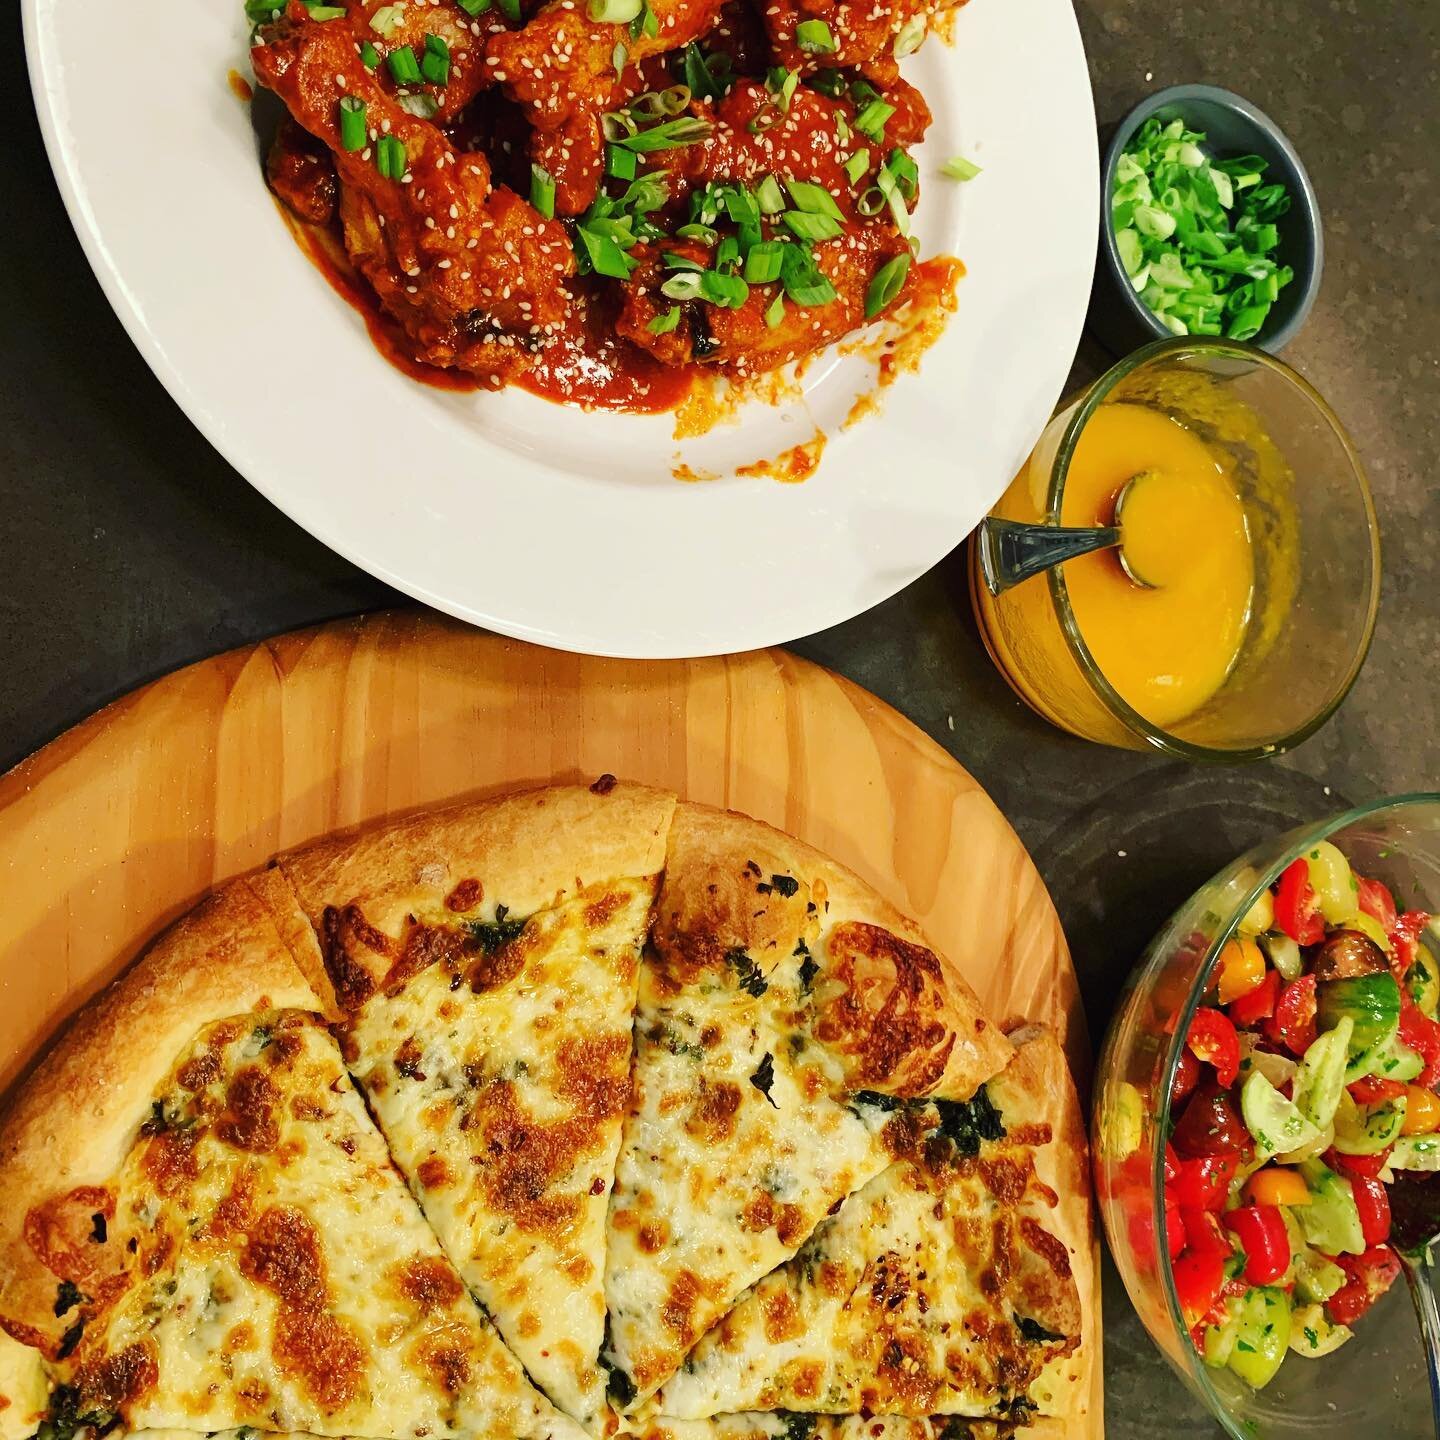 Snacks for tonight&rsquo;s match!
#NYCFC 
#Gochujang wings with spicy mango sauce 
White pizza with spinach and garlic 
#Tomato salad 
🥭🌶🧄🍅🍕🥗😋